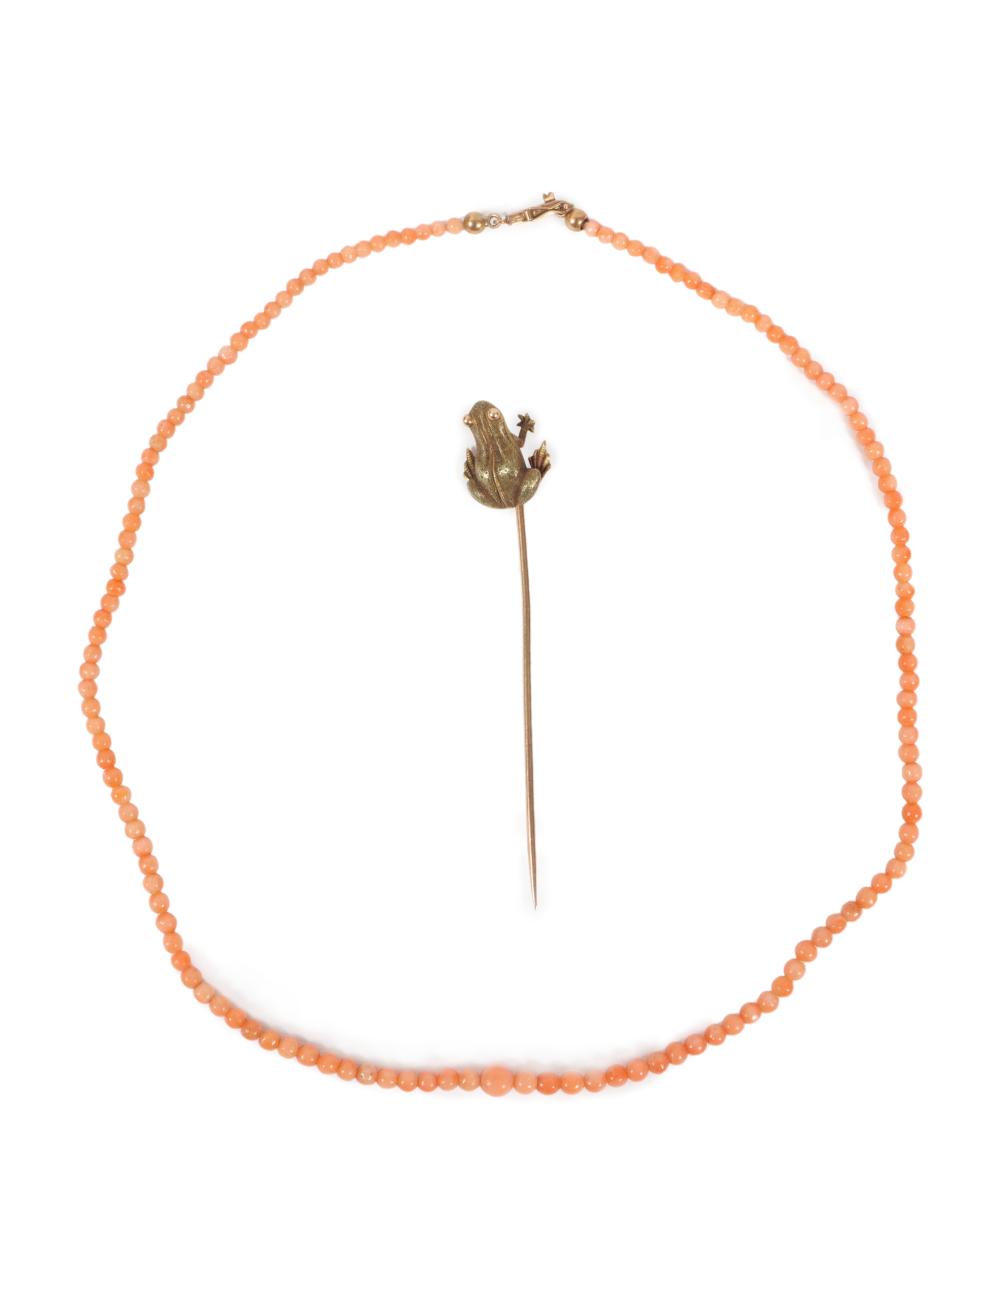 CORAL SEED BEAD NECKLACE WITH 12CT 3b2fd4